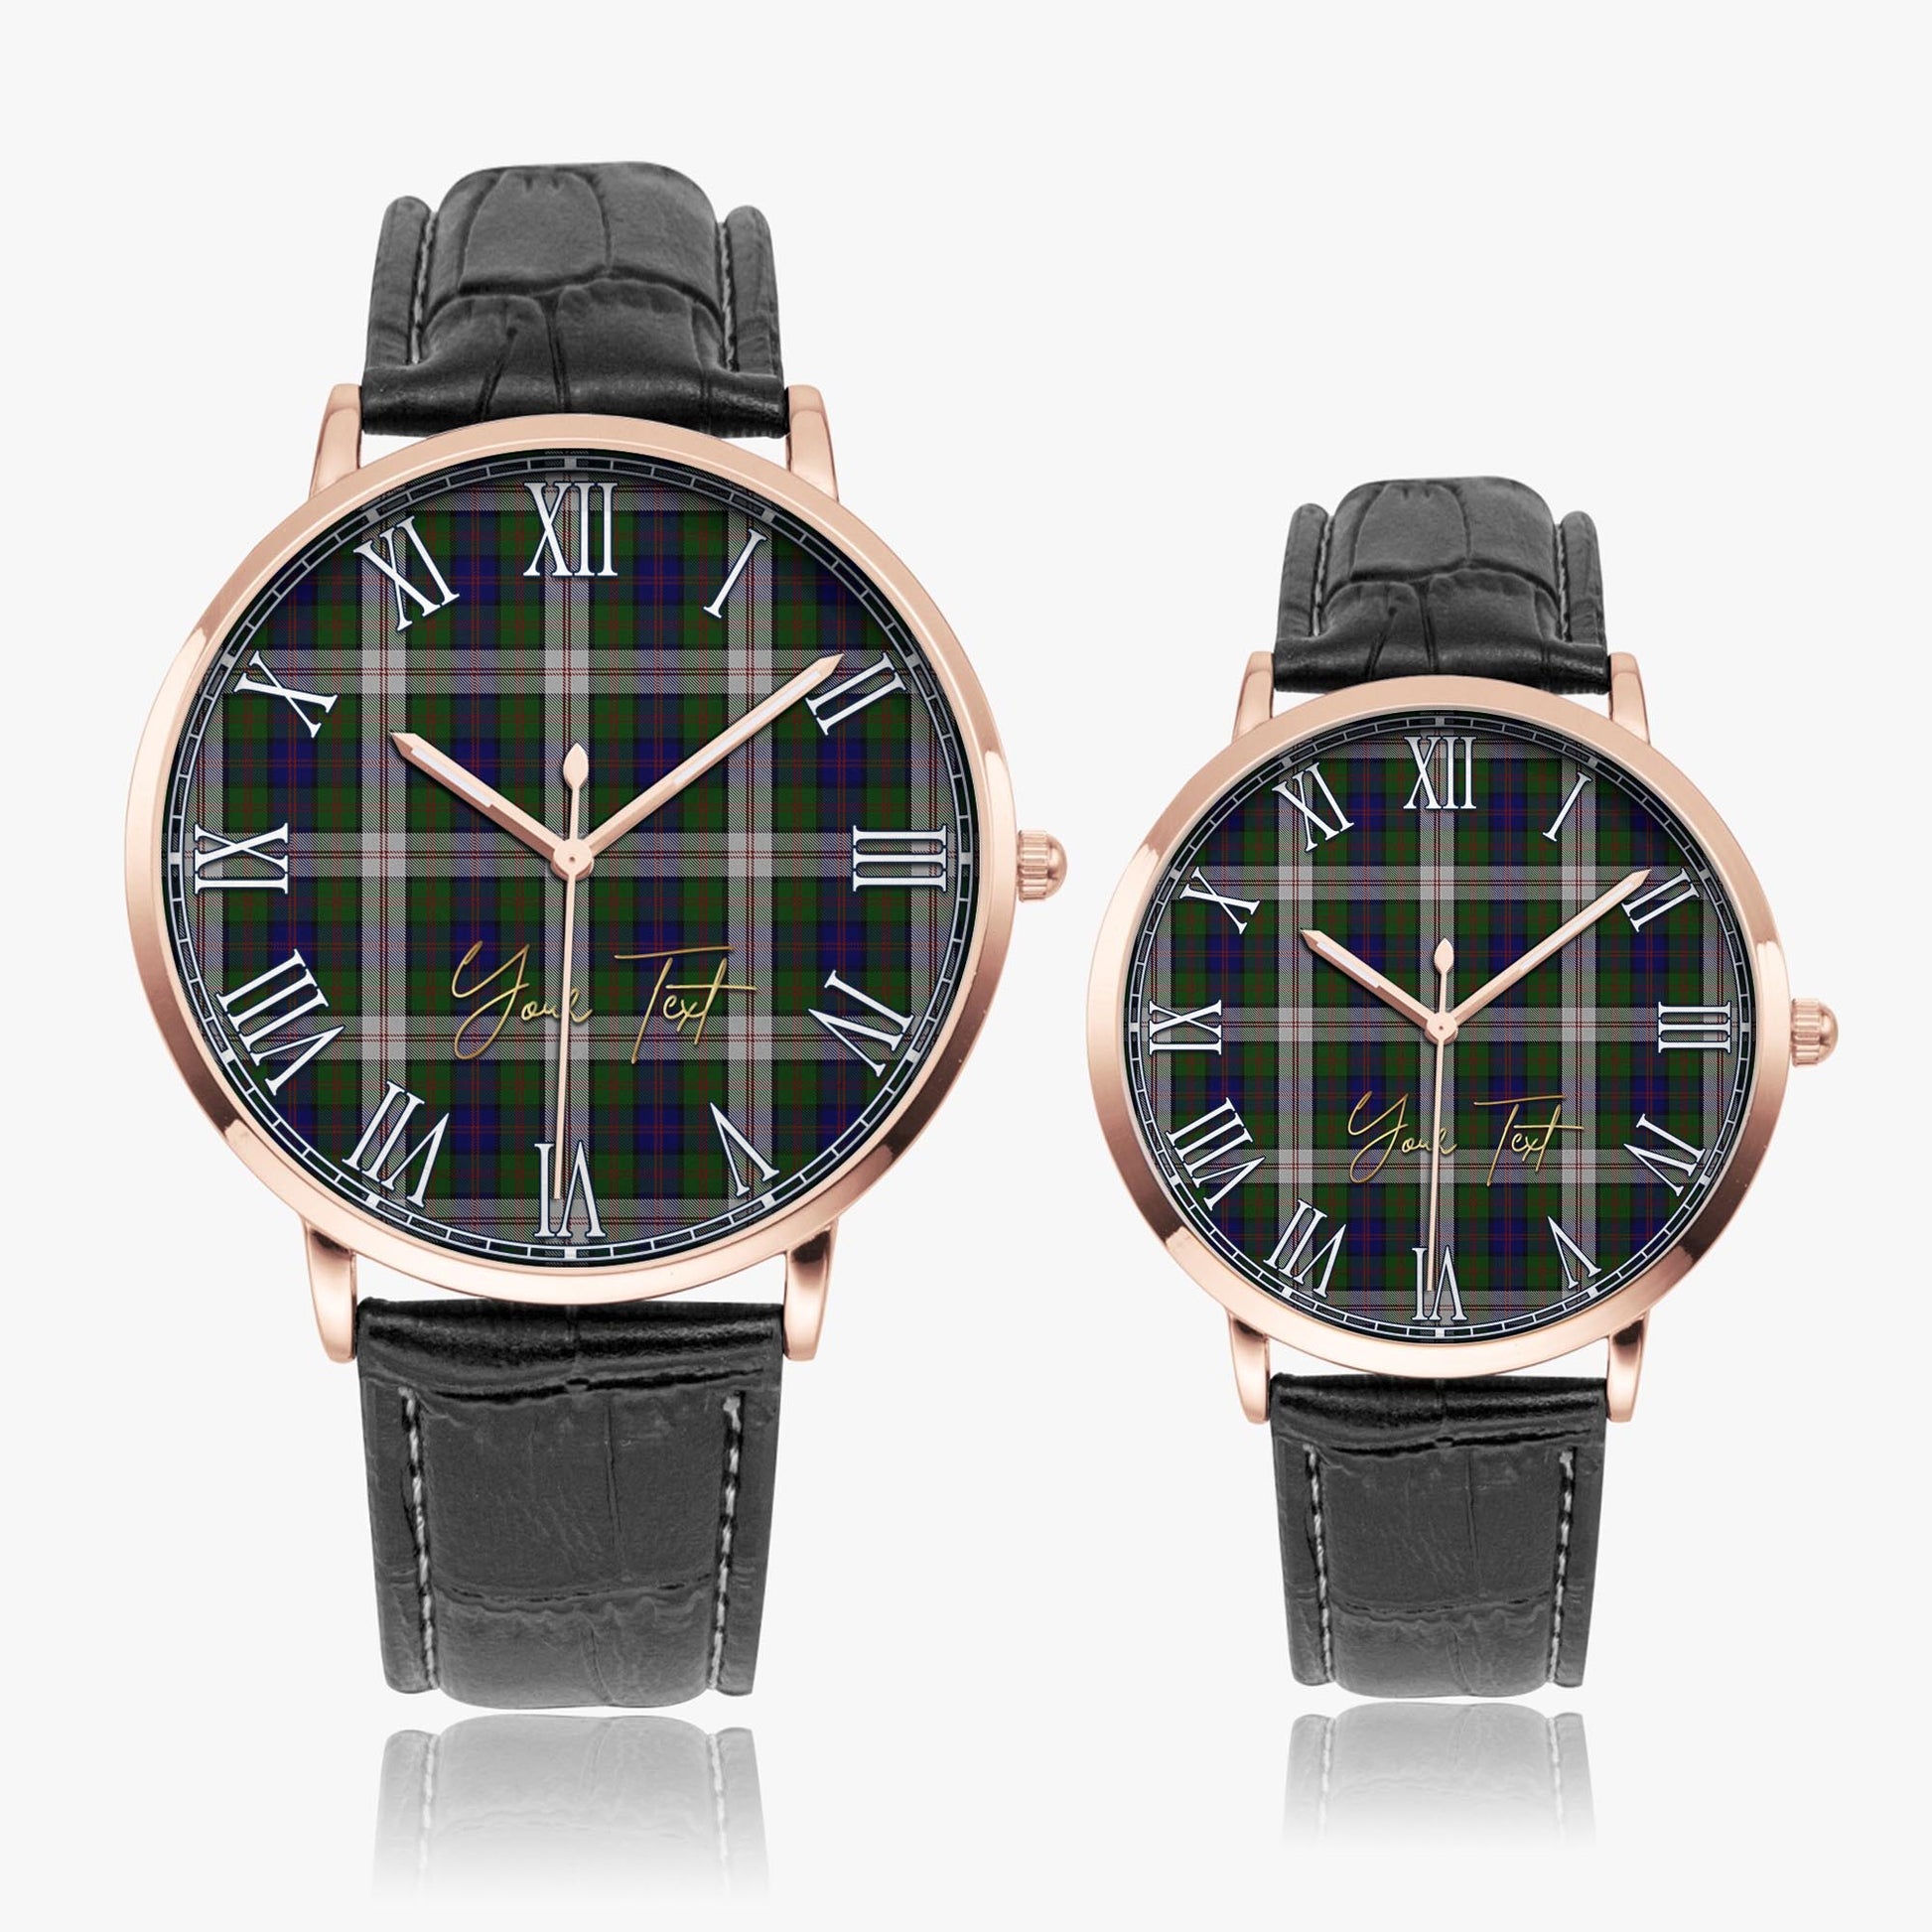 Blair Dress Tartan Personalized Your Text Leather Trap Quartz Watch Ultra Thin Rose Gold Case With Black Leather Strap - Tartanvibesclothing